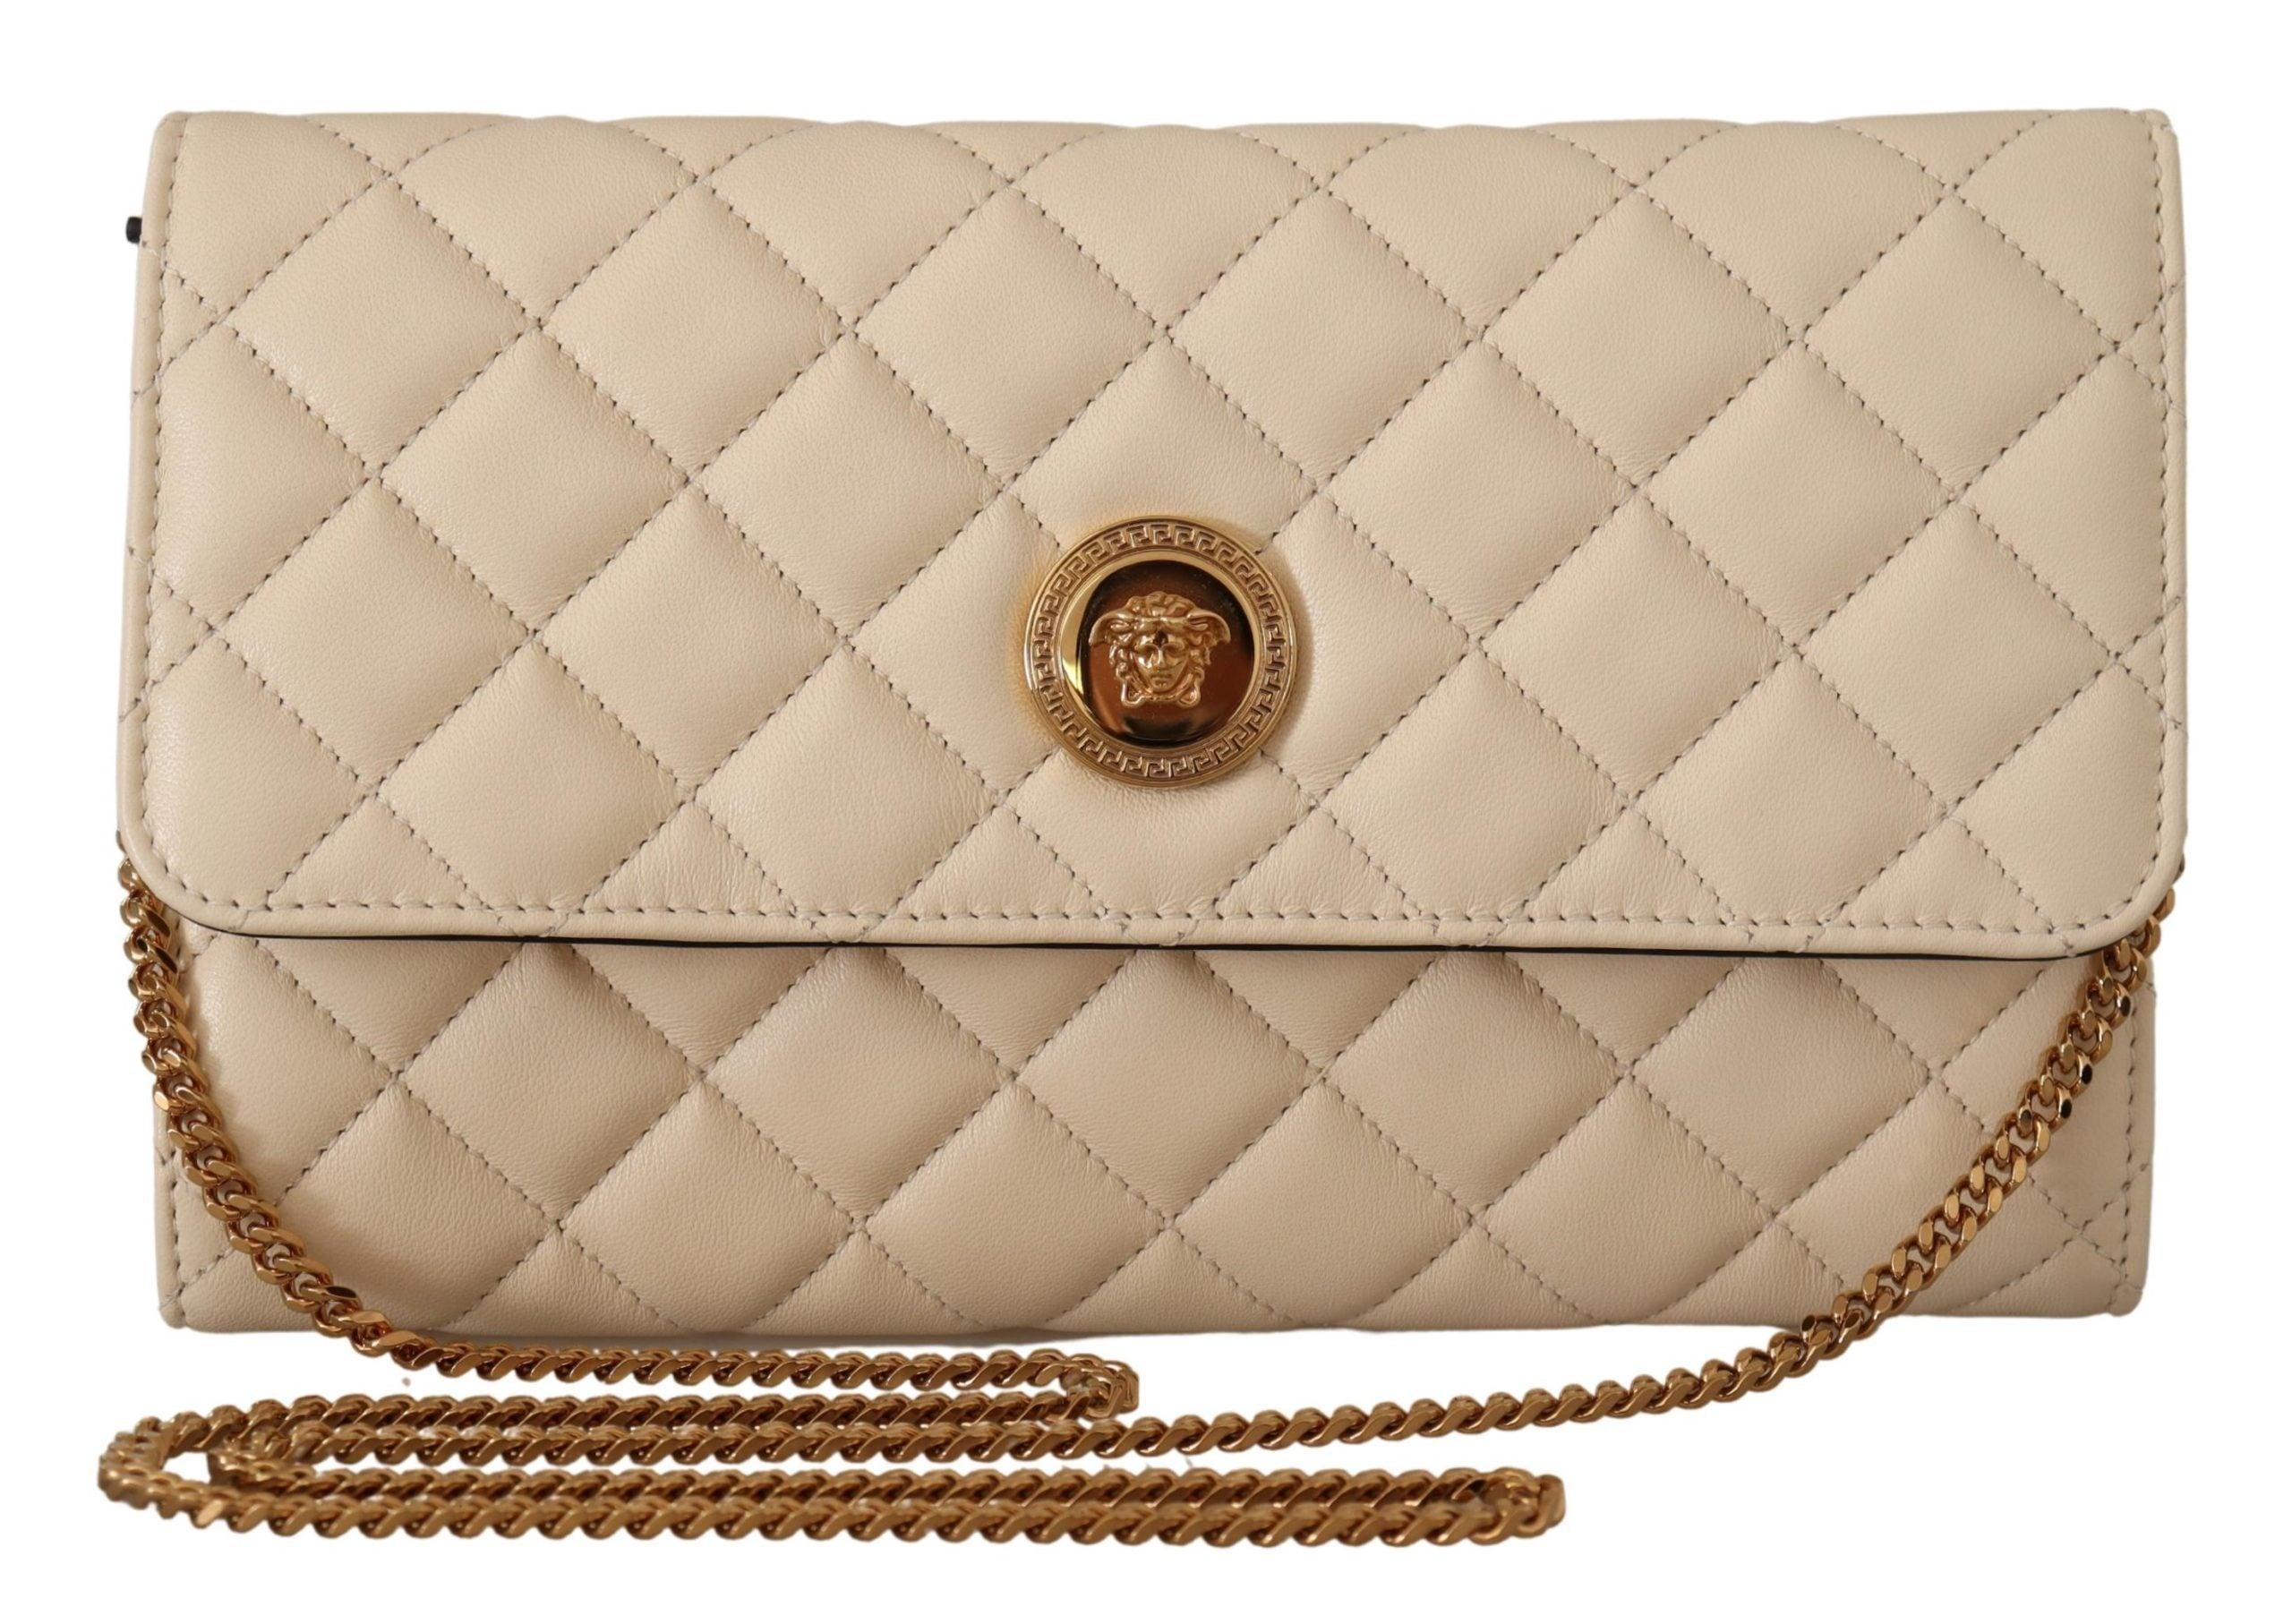 Versace Nappa Leather Medusa Evening Bag in Natural | Lyst